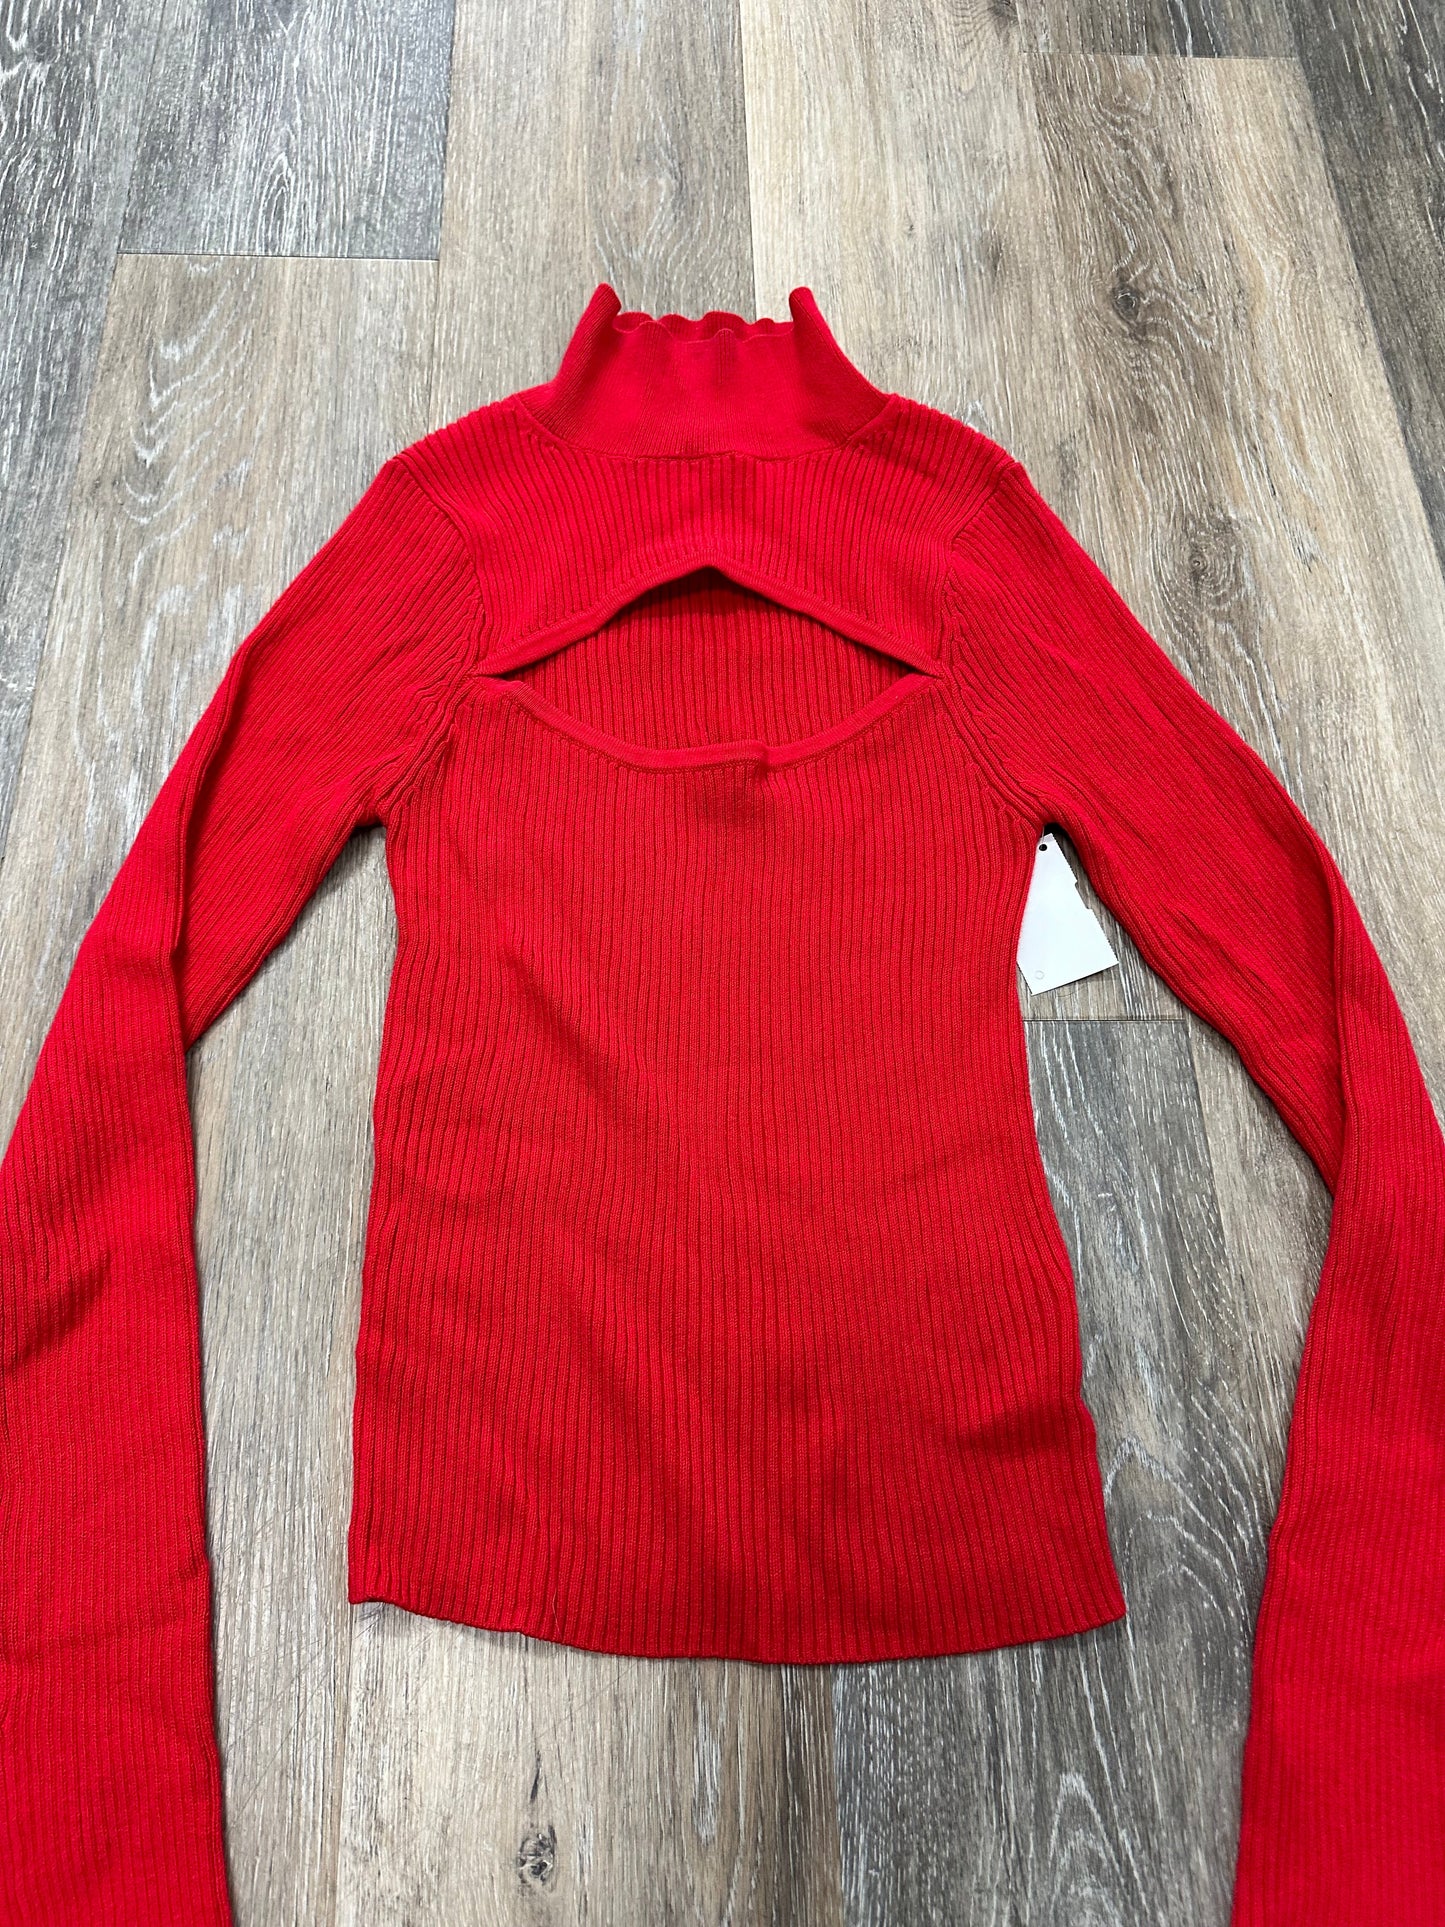 Sweater By NBD  Size: S